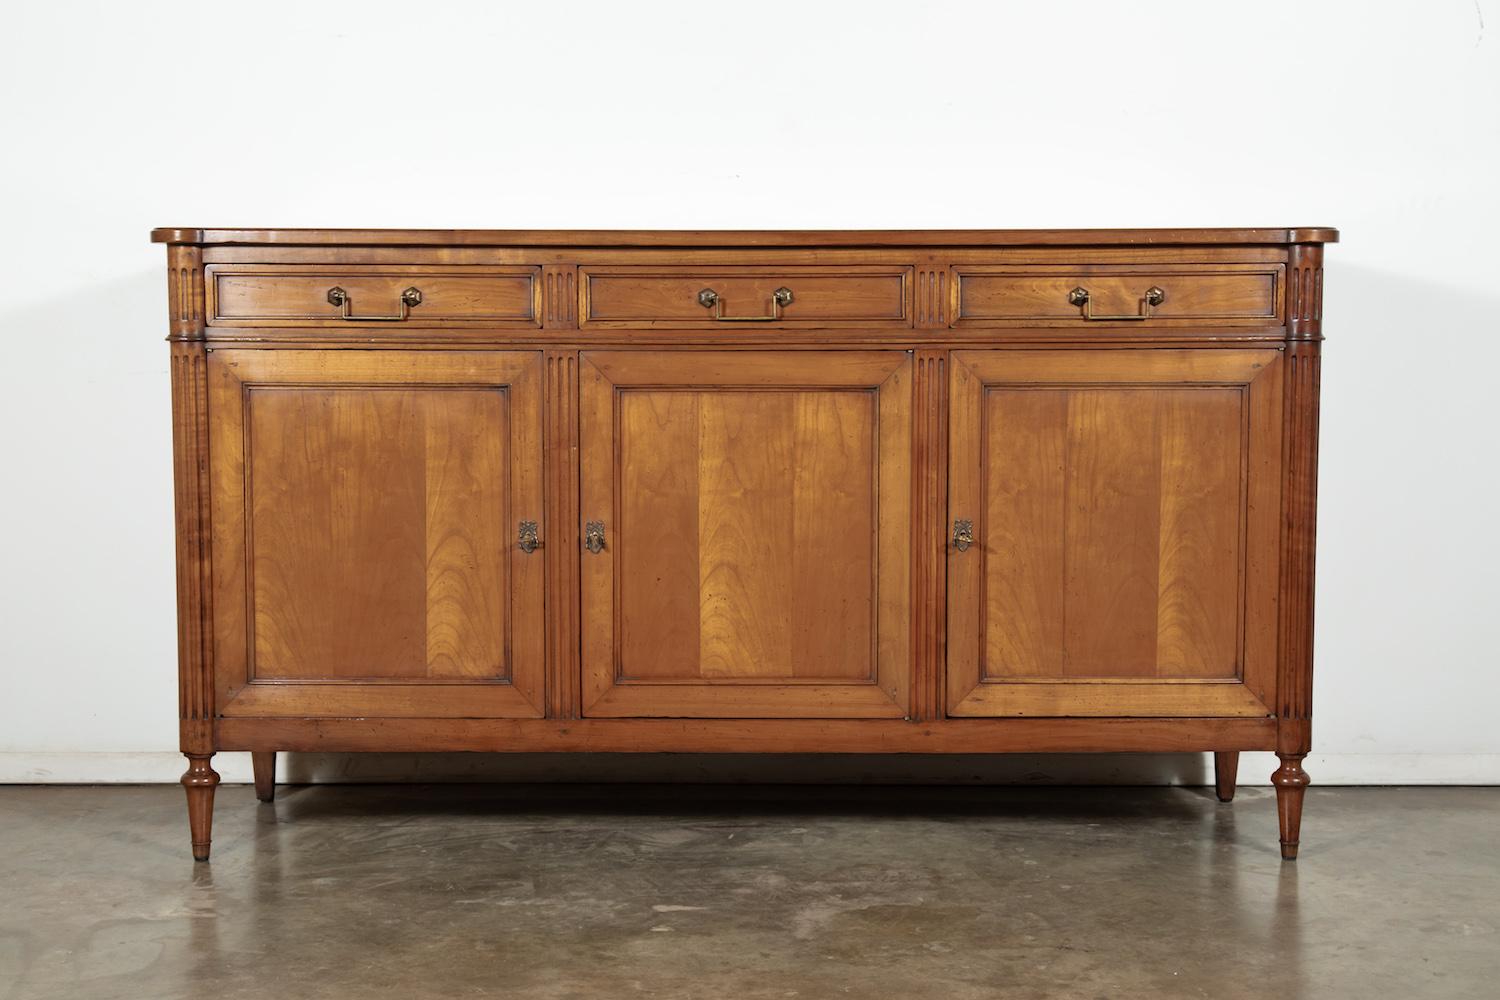 Handsome, French, Louis XVI style solid cherrywood enfilade buffet from the Brittany region, having three drawers with drop bail handles over four panelled doors. This extremely attractive enfilade with its straight lines and warm patina features